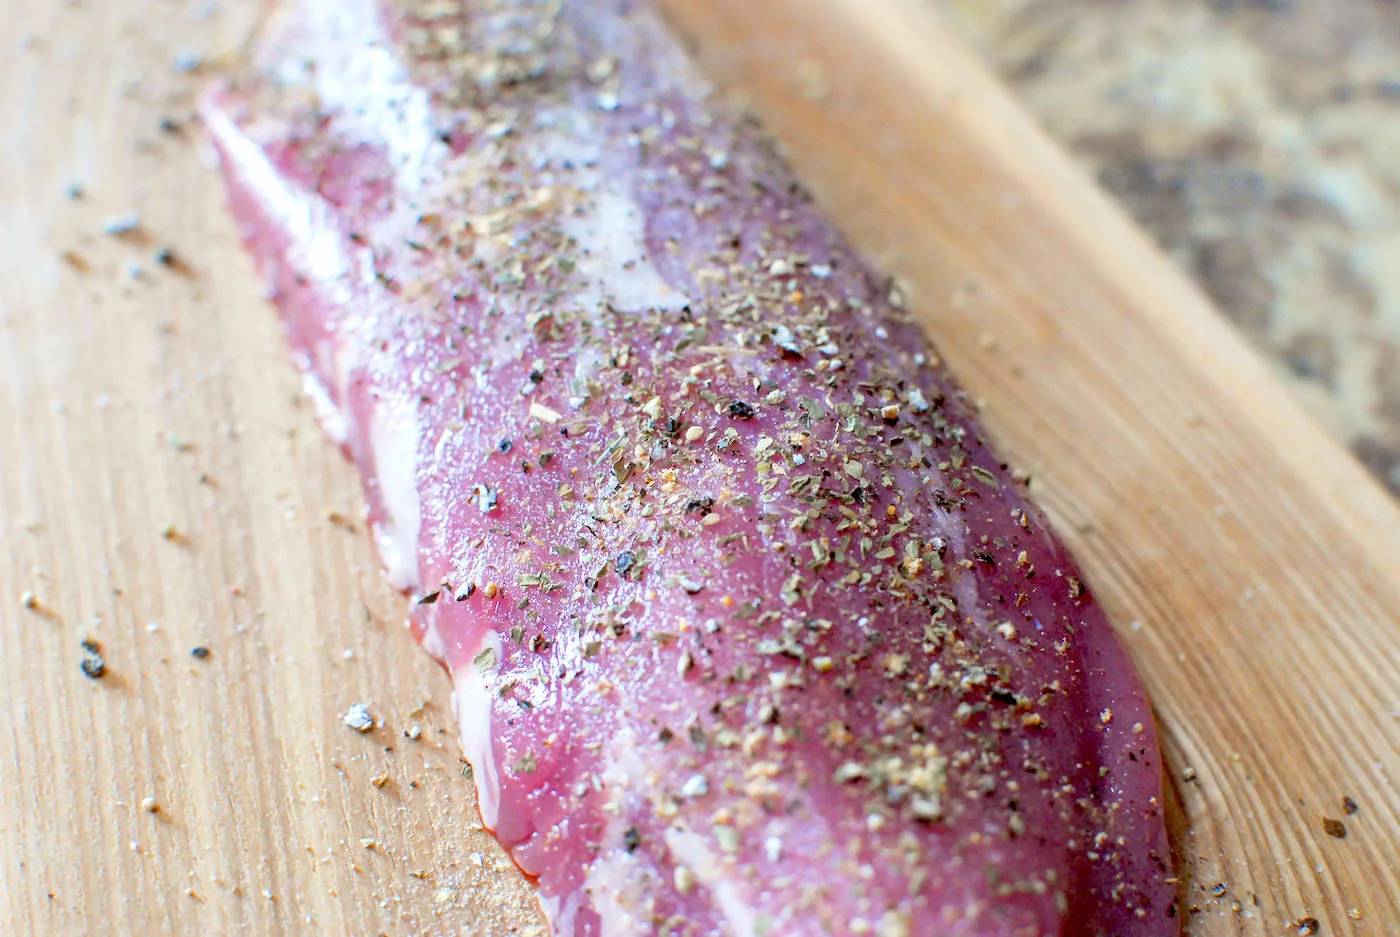 Pork loin sitting on a cutting board with spices